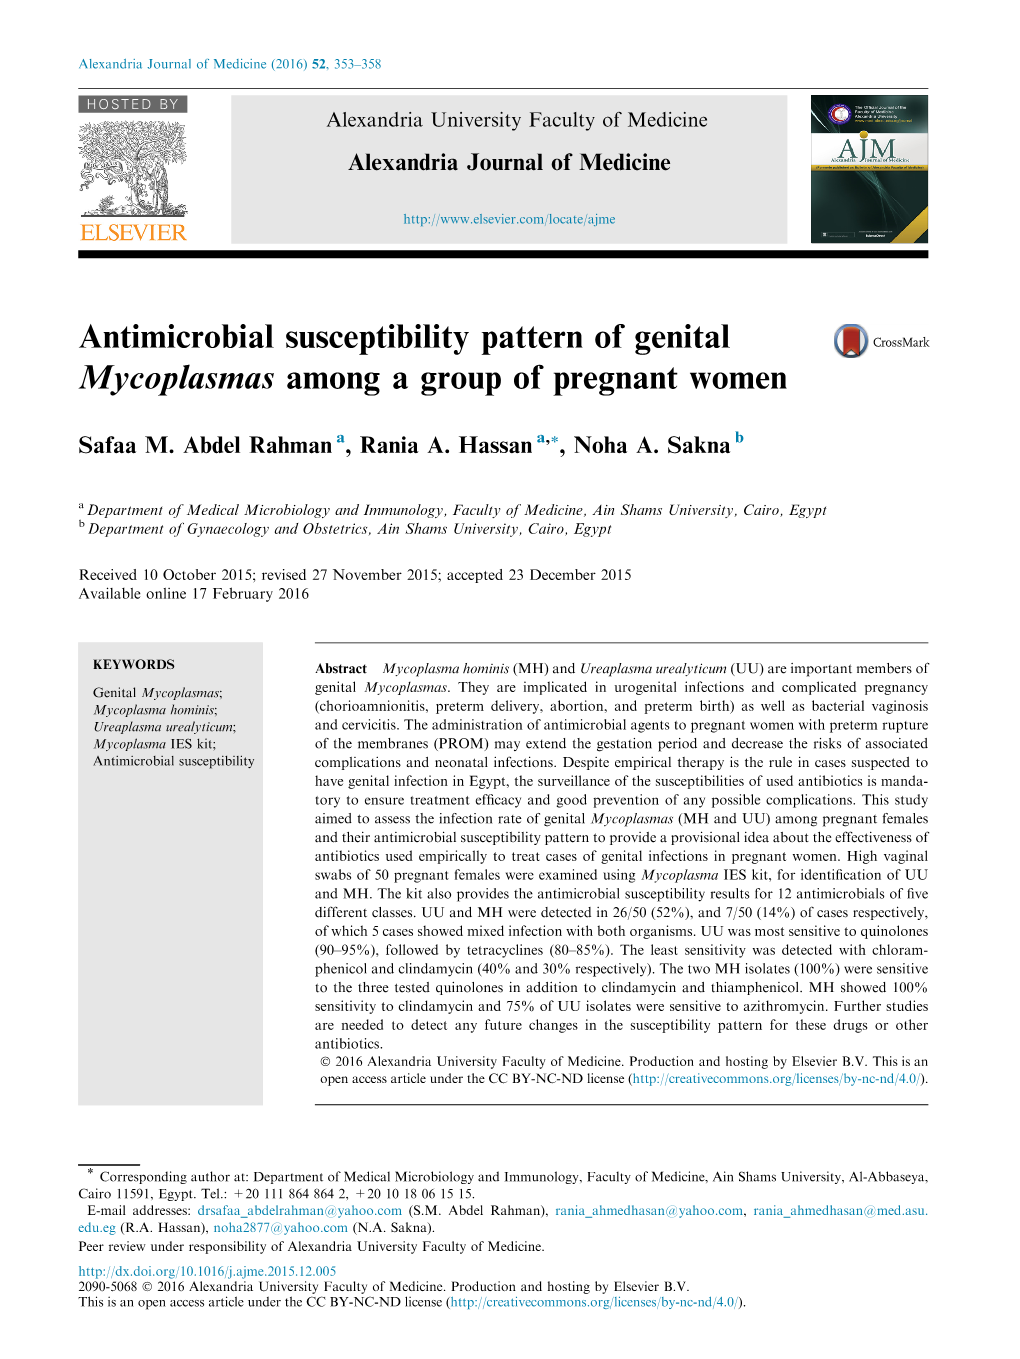 Antimicrobial Susceptibility Pattern of Genital Mycoplasmas Among a Group of Pregnant Women